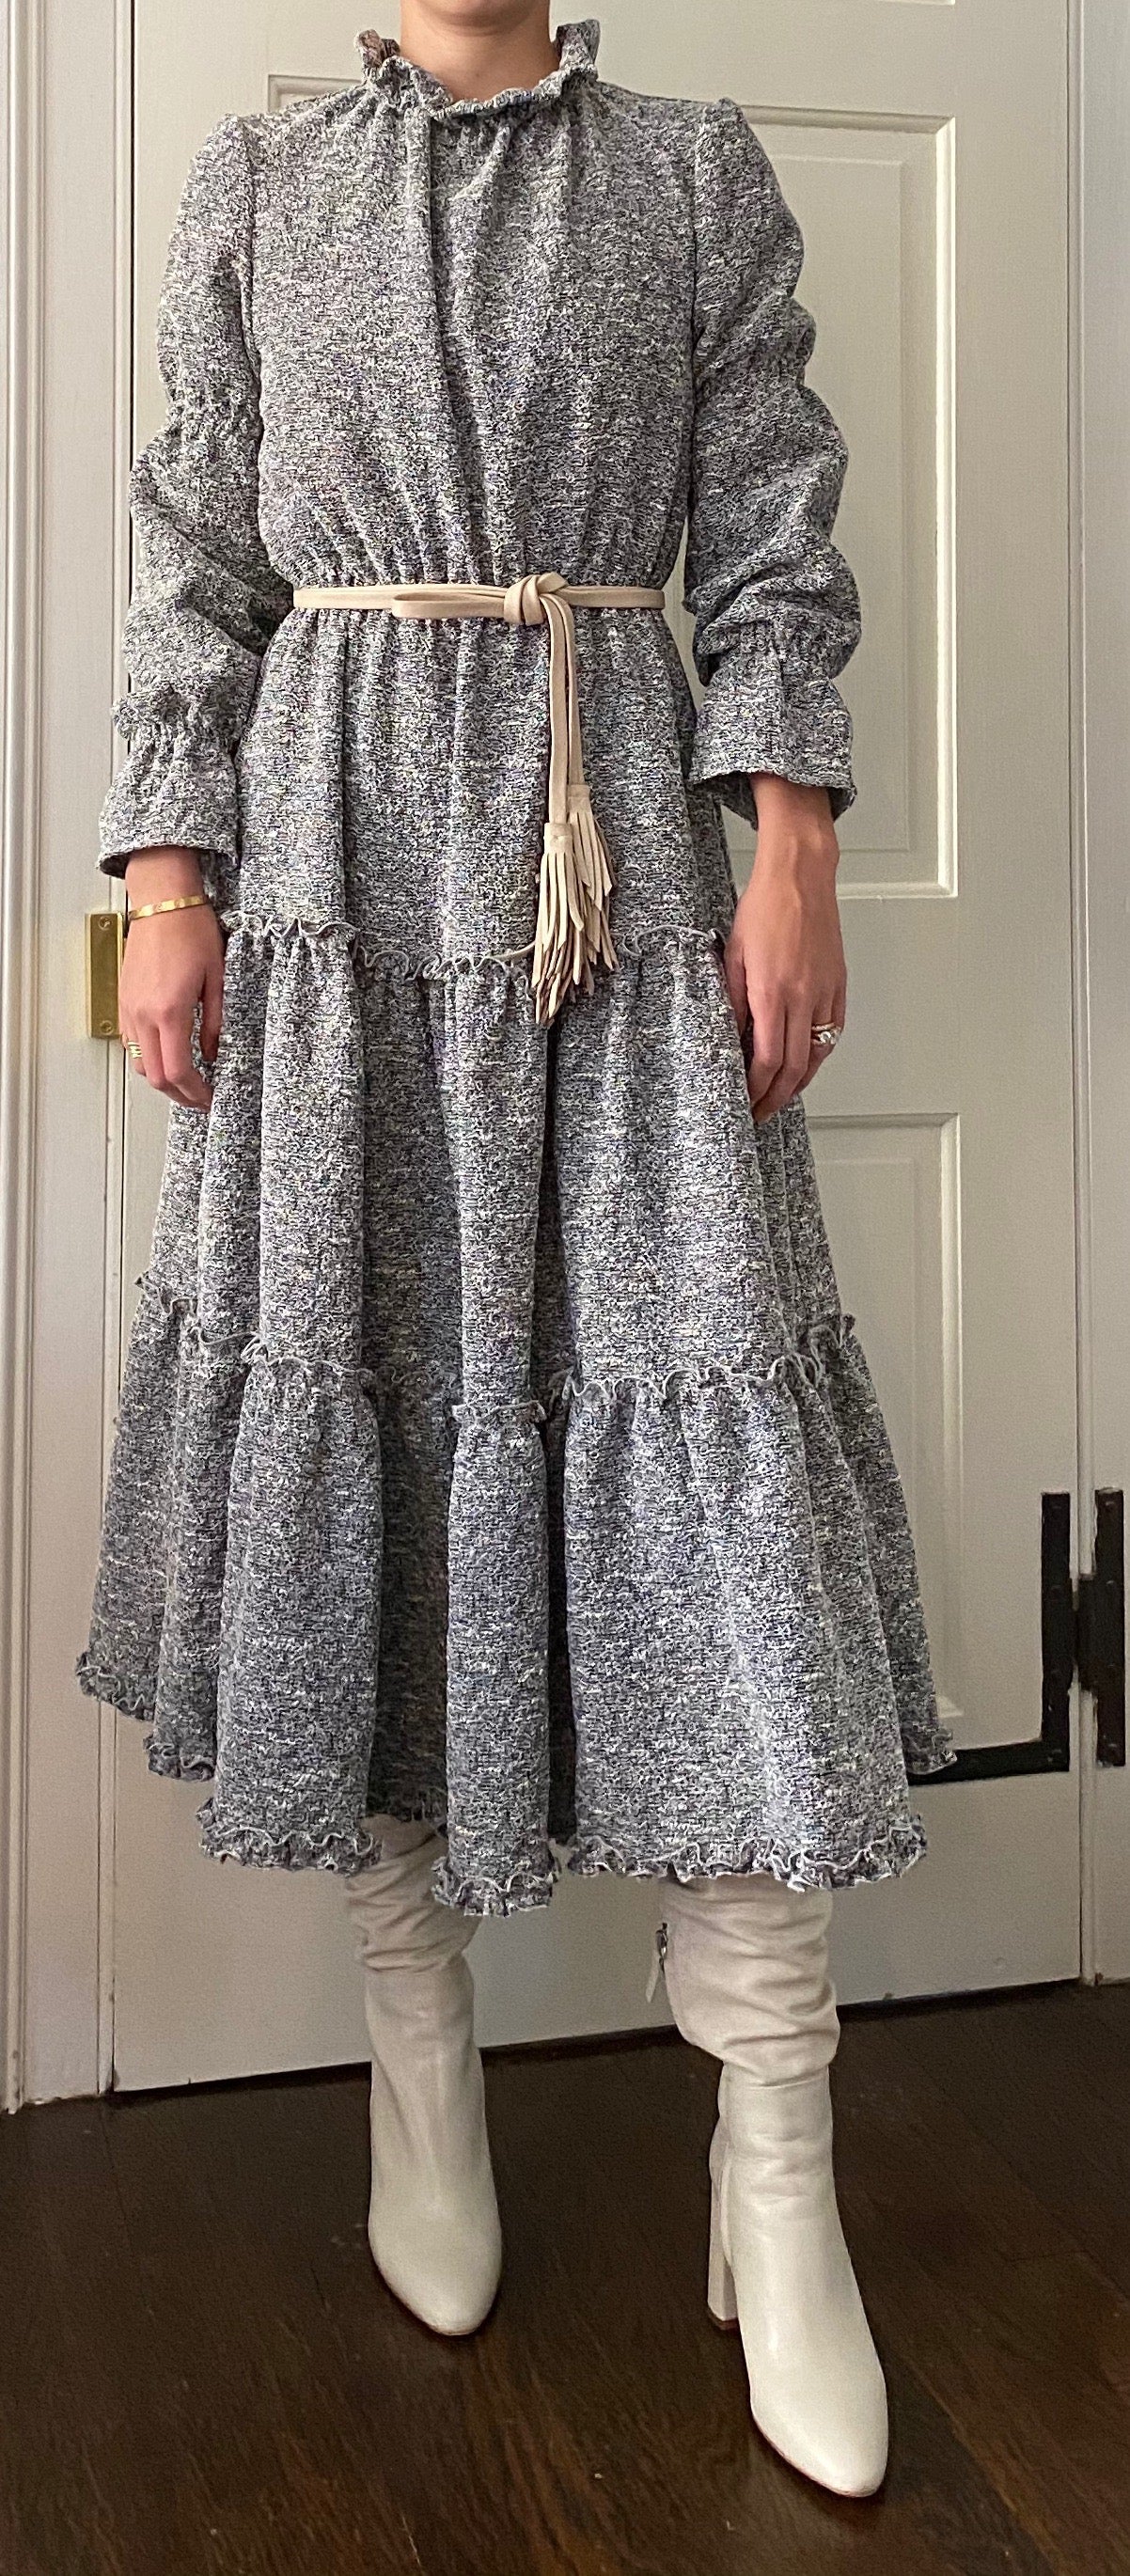 Alden Dress in Stretchy Tweed - CCH Collection